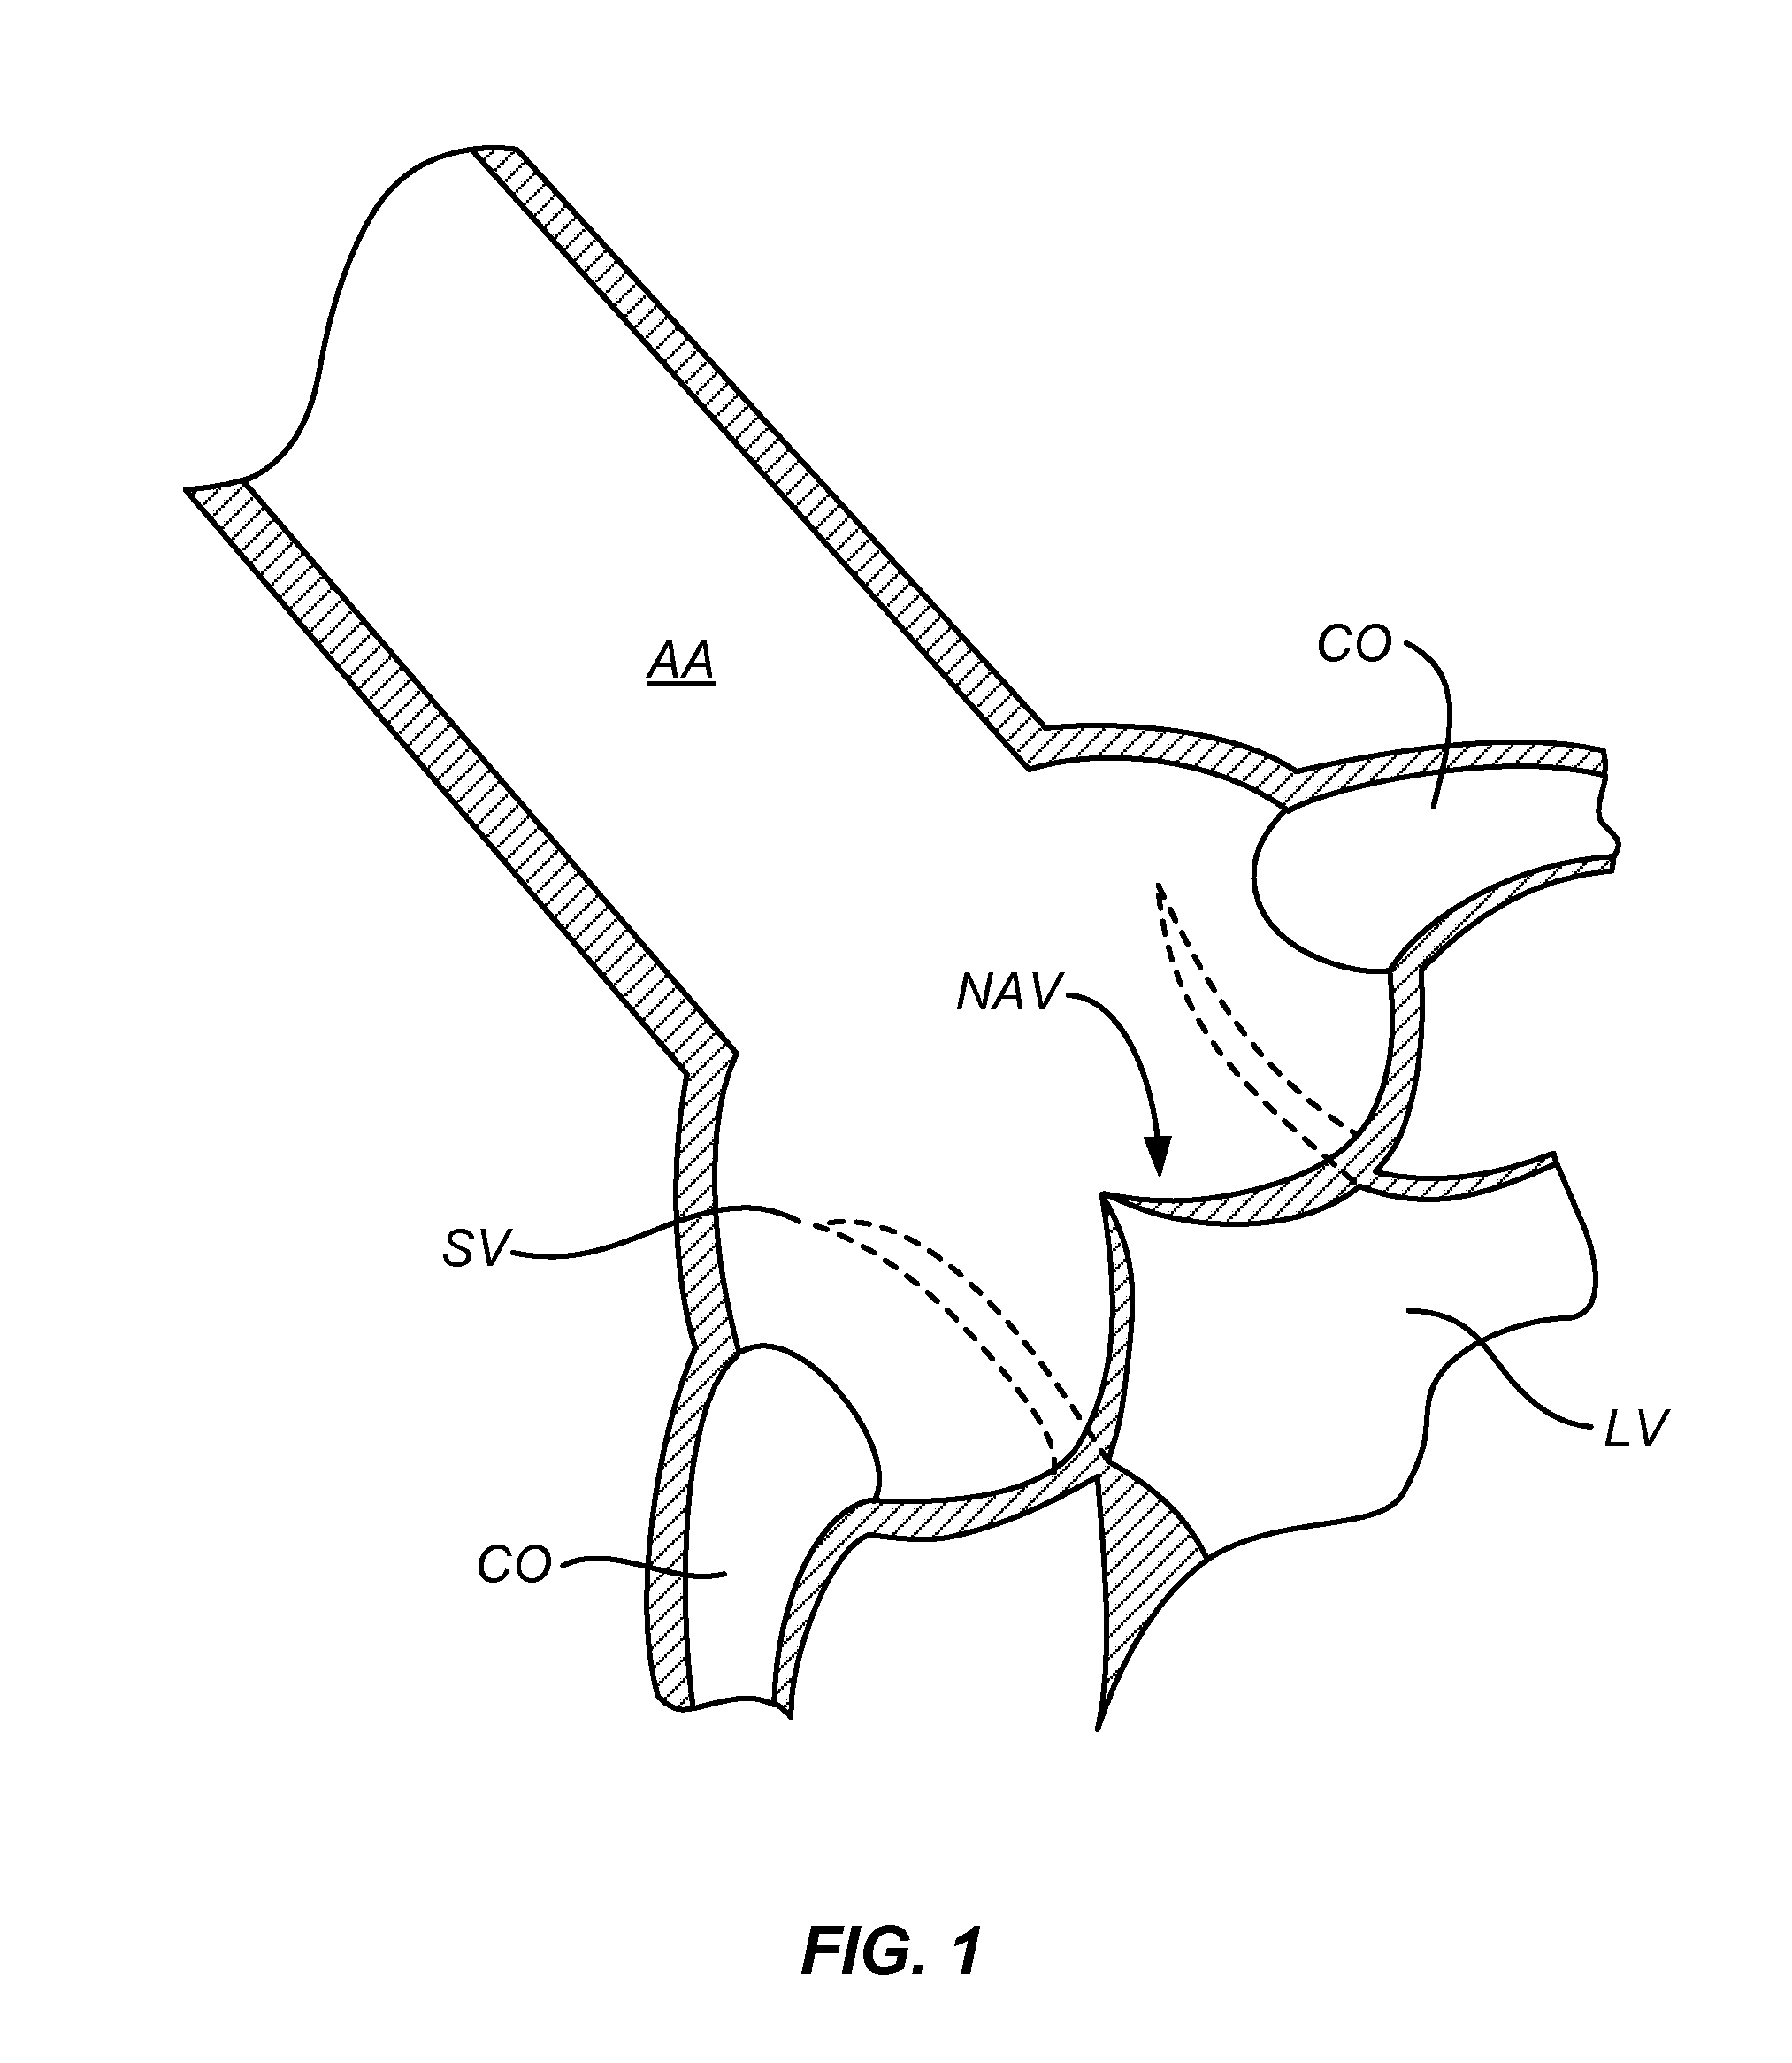 Method and system for balloon counterpulsation during aortic valve replacement